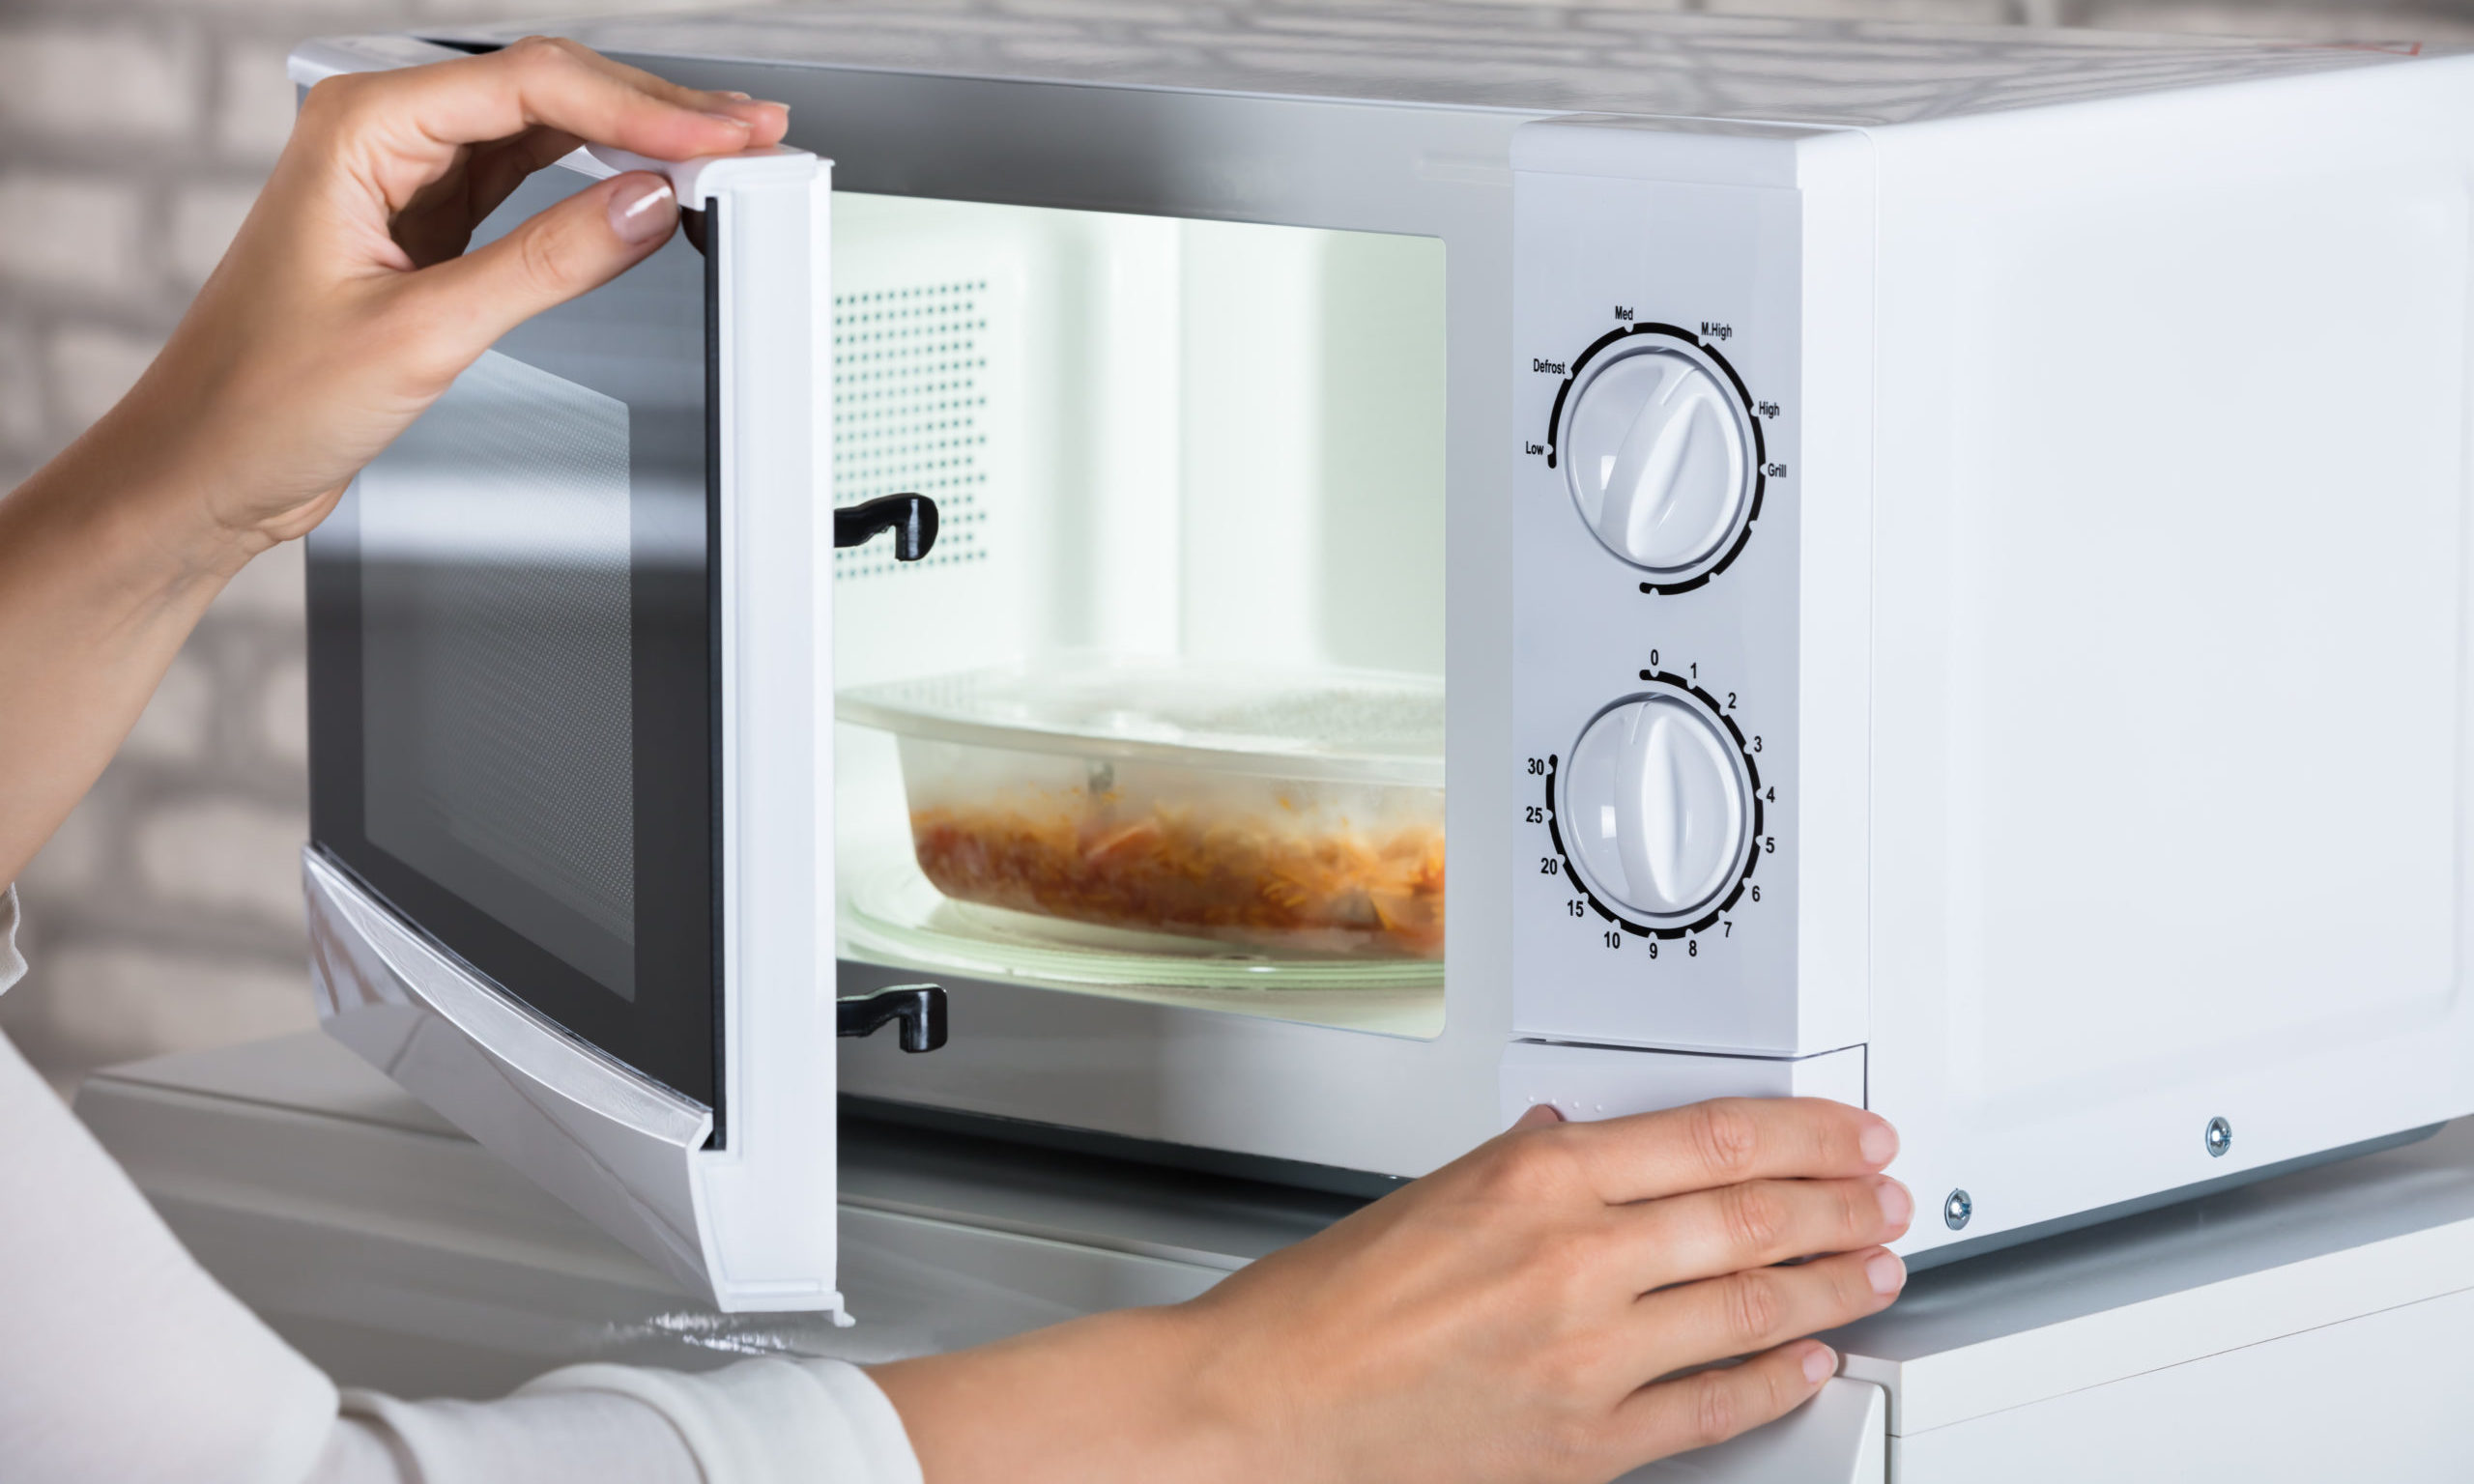 You can do so much more with your microwave oven other than just reheating food.